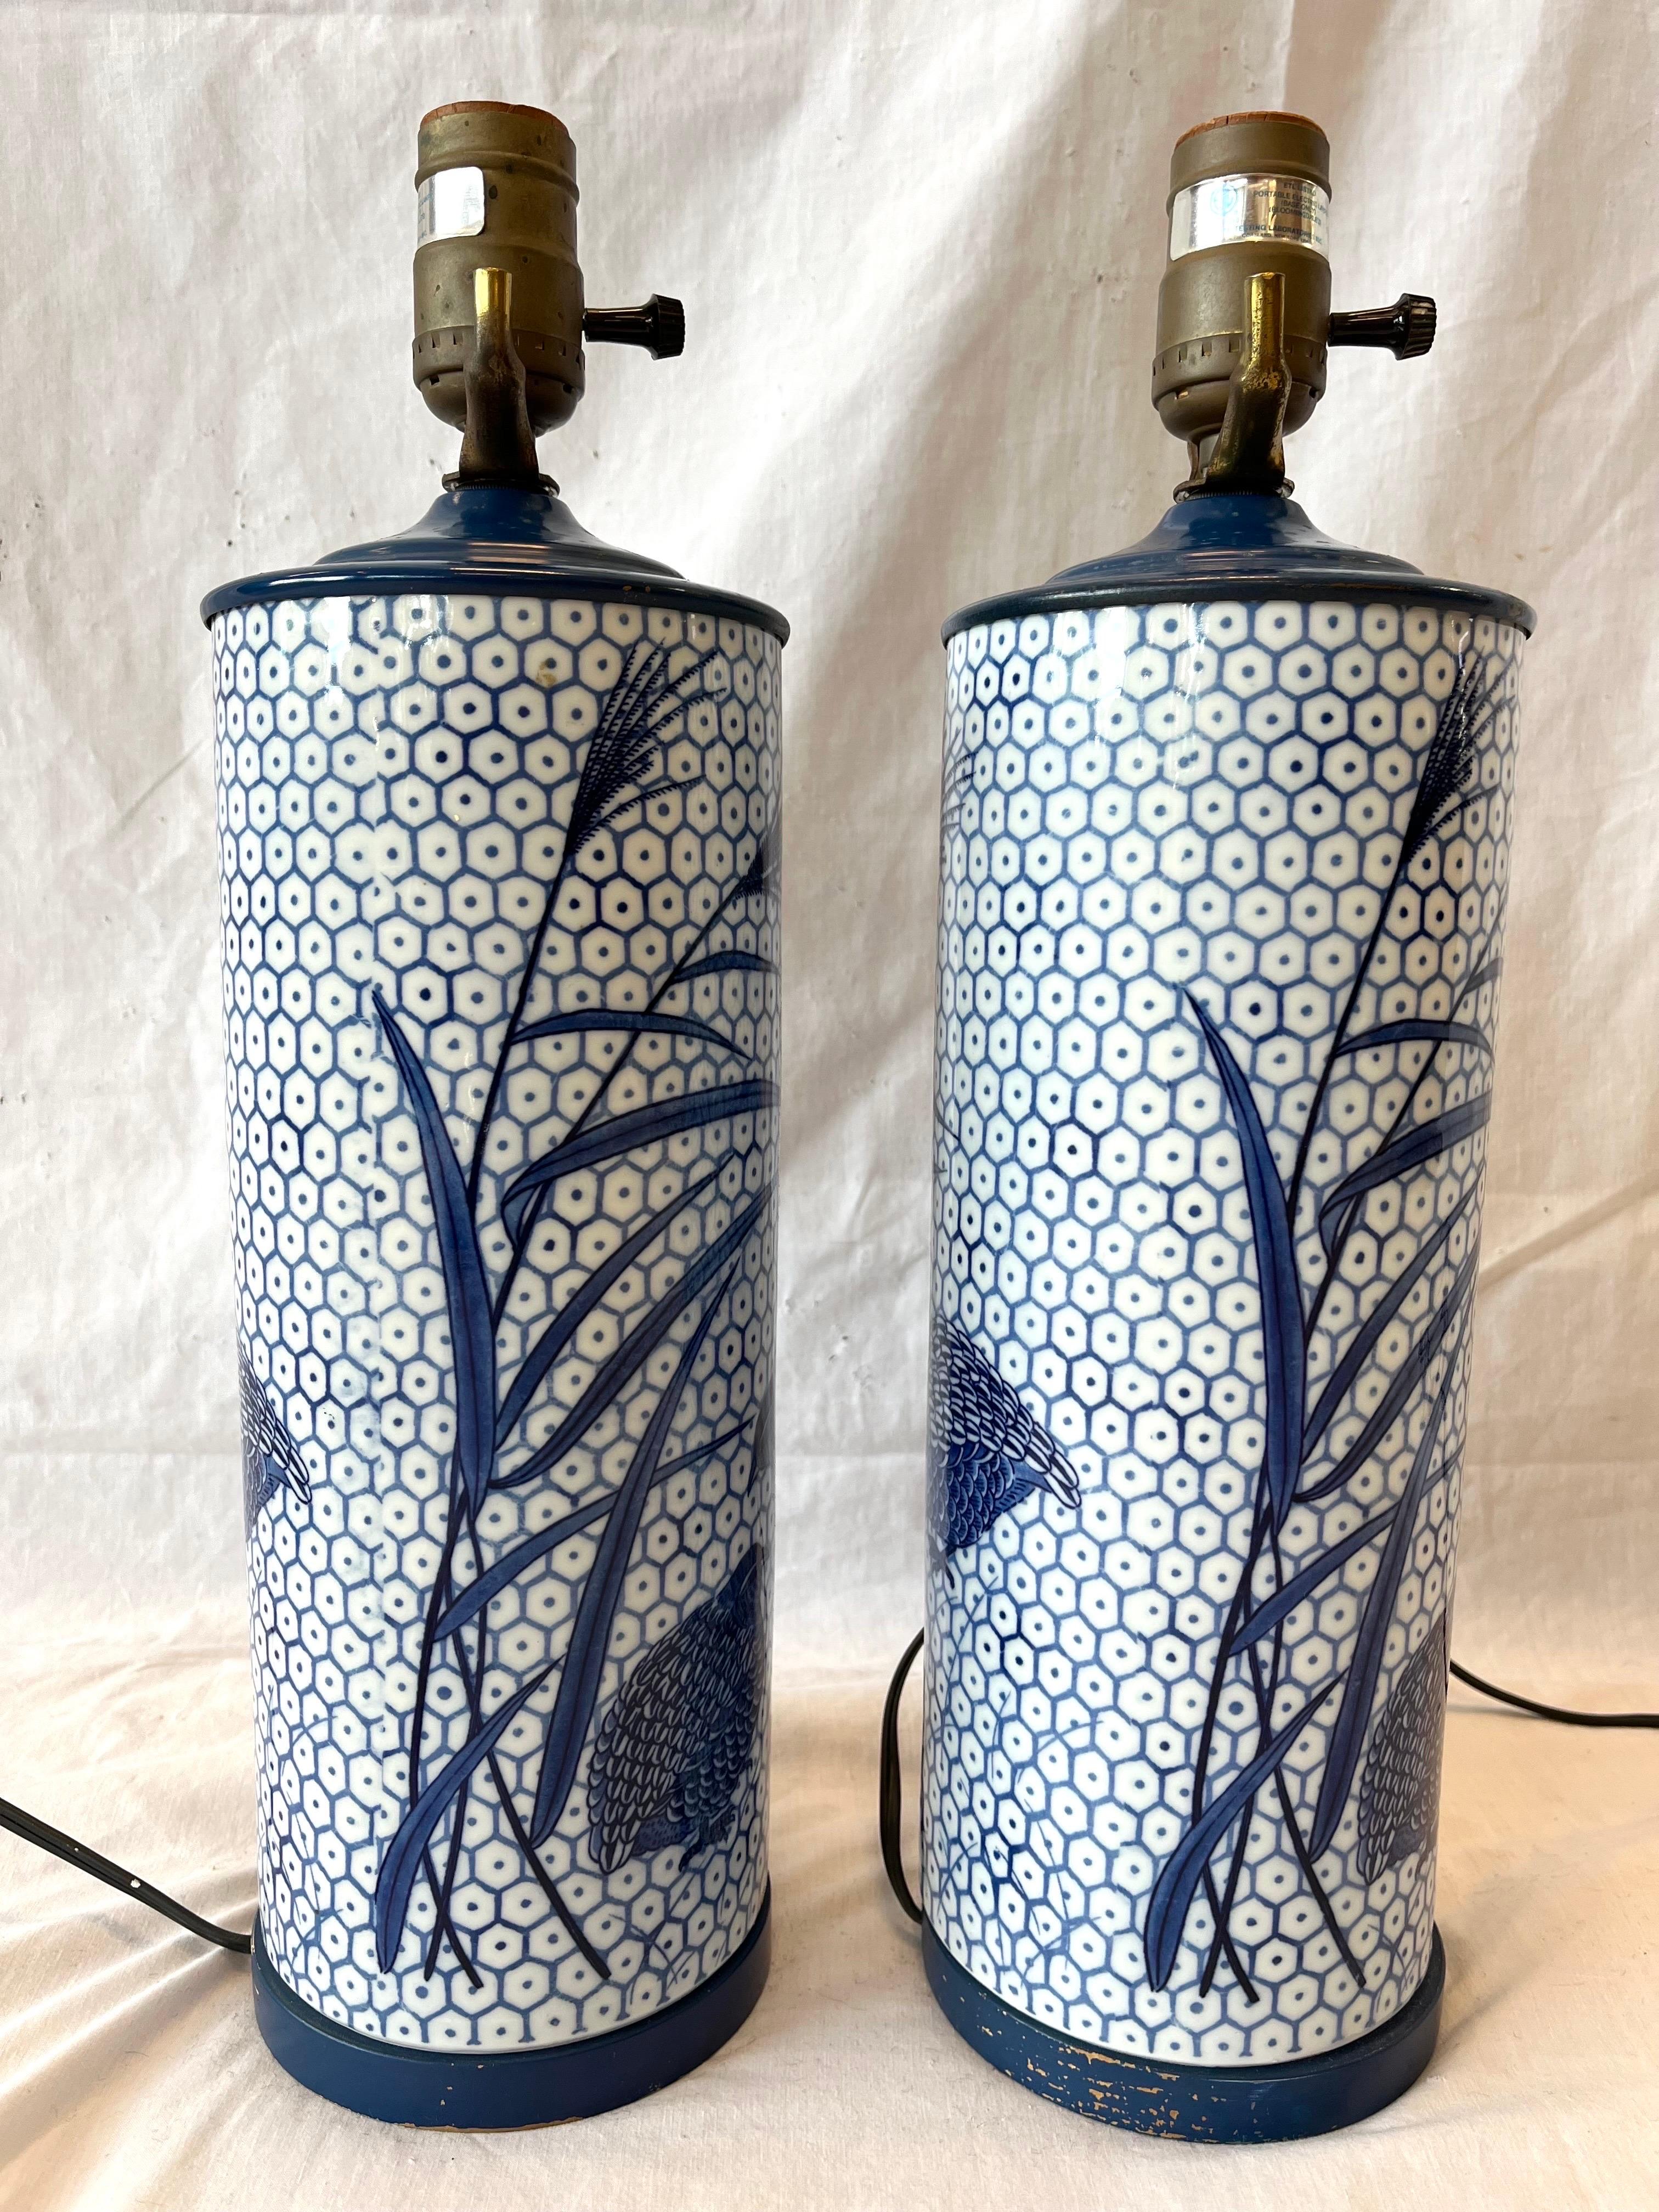 Hollywood Regency Vintage Pair of Blue and White Ceramic Table Lamps Retailed by Bloomingdale’s 